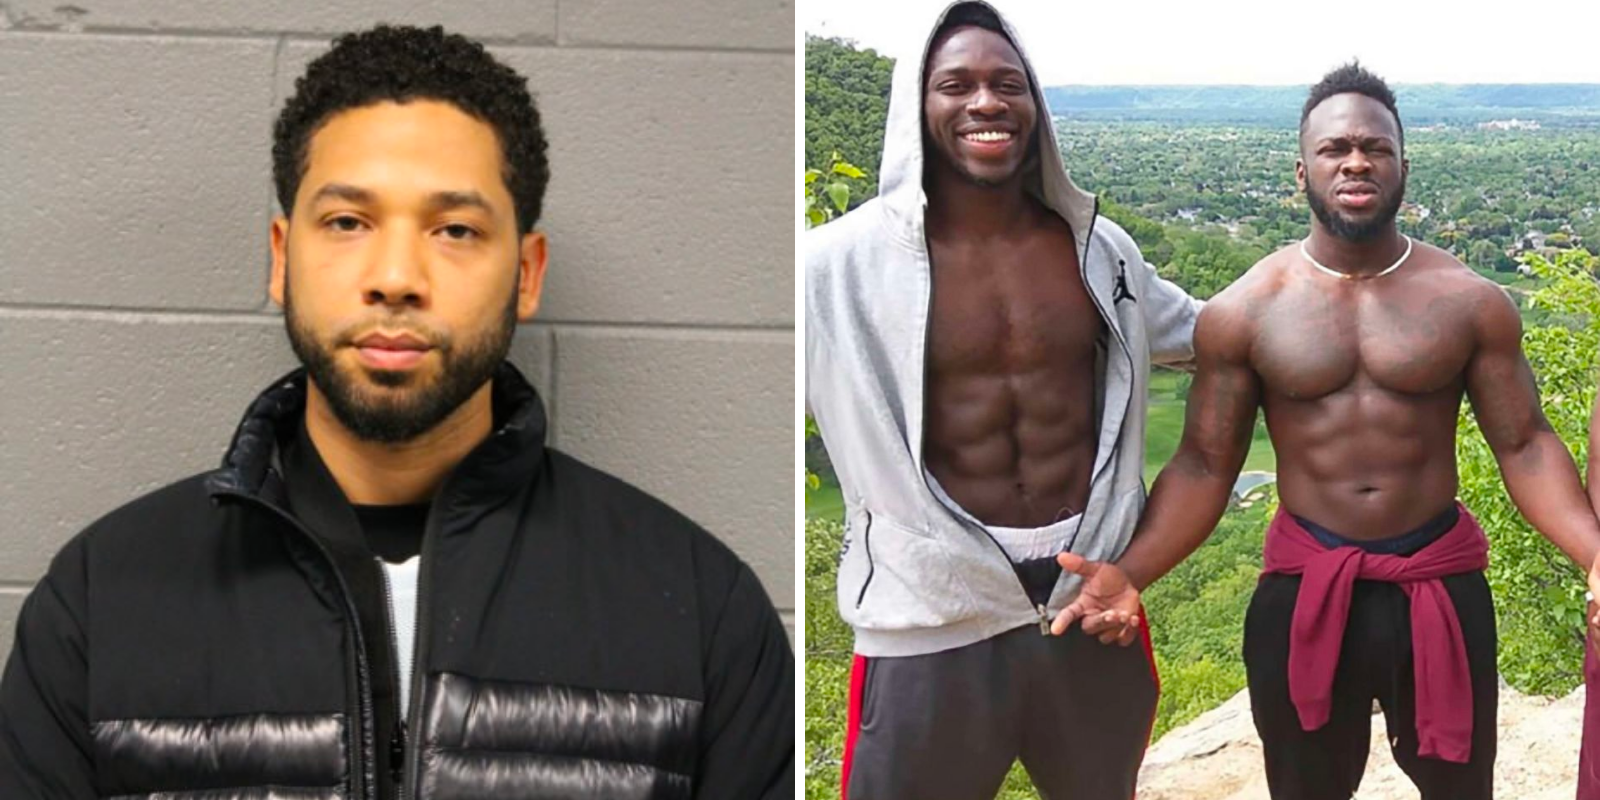 Jussie Smollett, Nigerian brothers went on 'dry run' of fake hate crime: prosecution